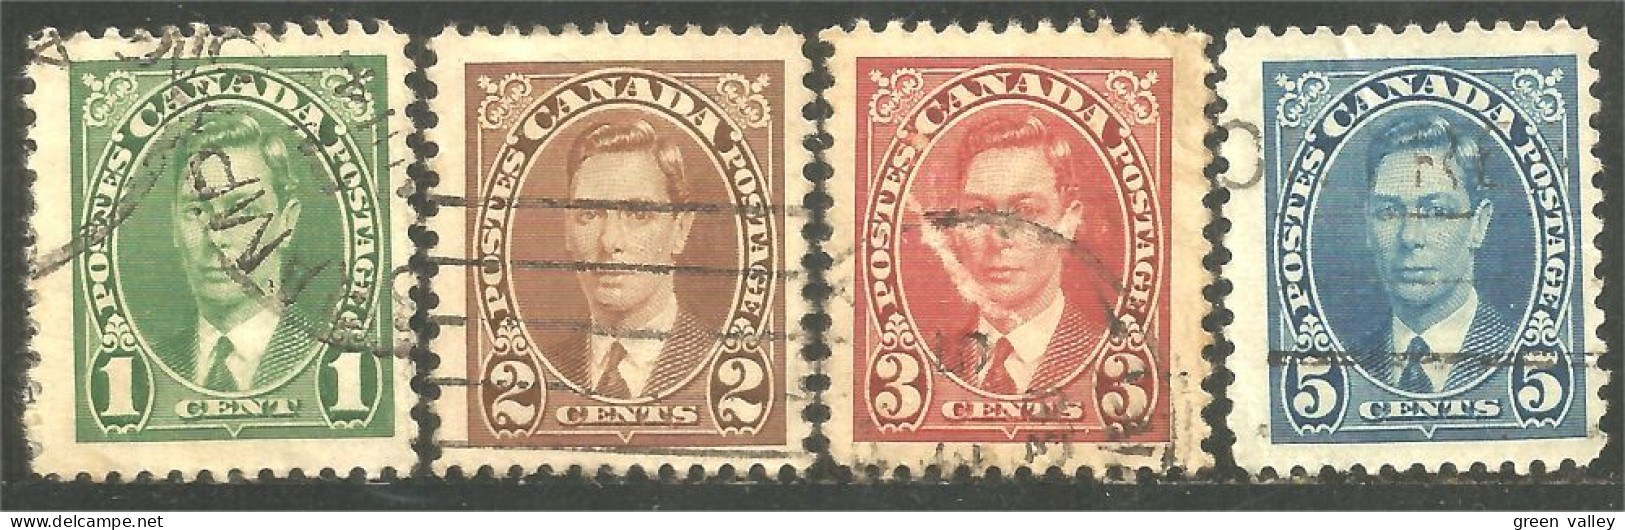 951 Canada 1937 King Roi George VI Mufti Issue 4 Timbres Stamps (484b) - Used Stamps